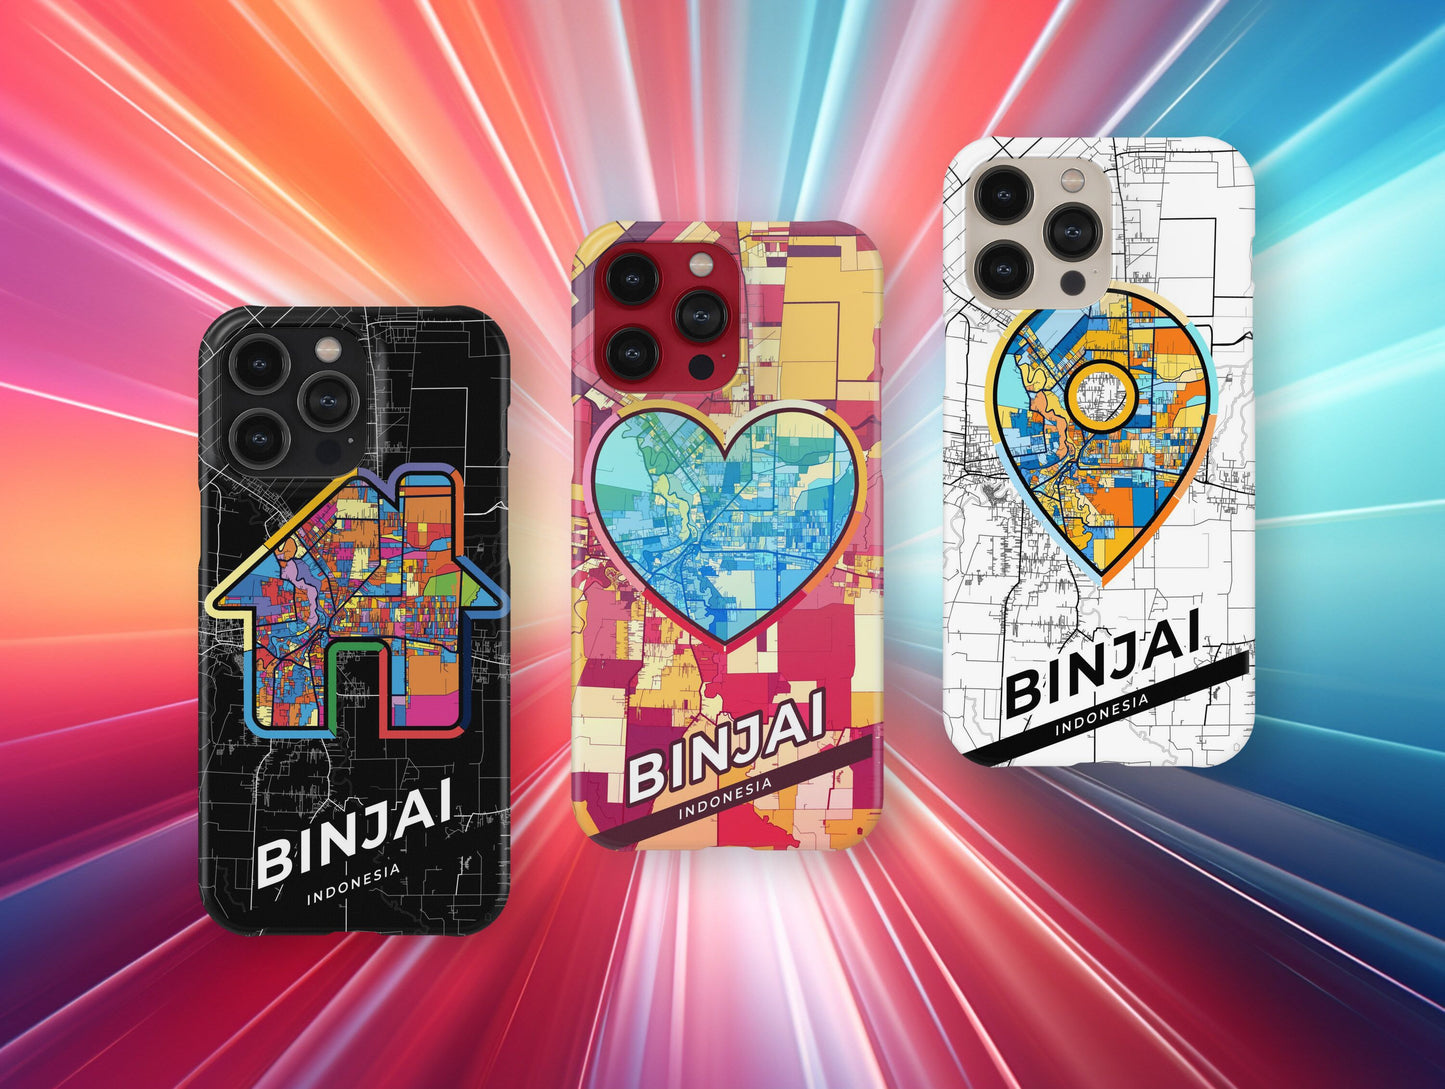 Binjai Indonesia slim phone case with colorful icon. Birthday, wedding or housewarming gift. Couple match cases.